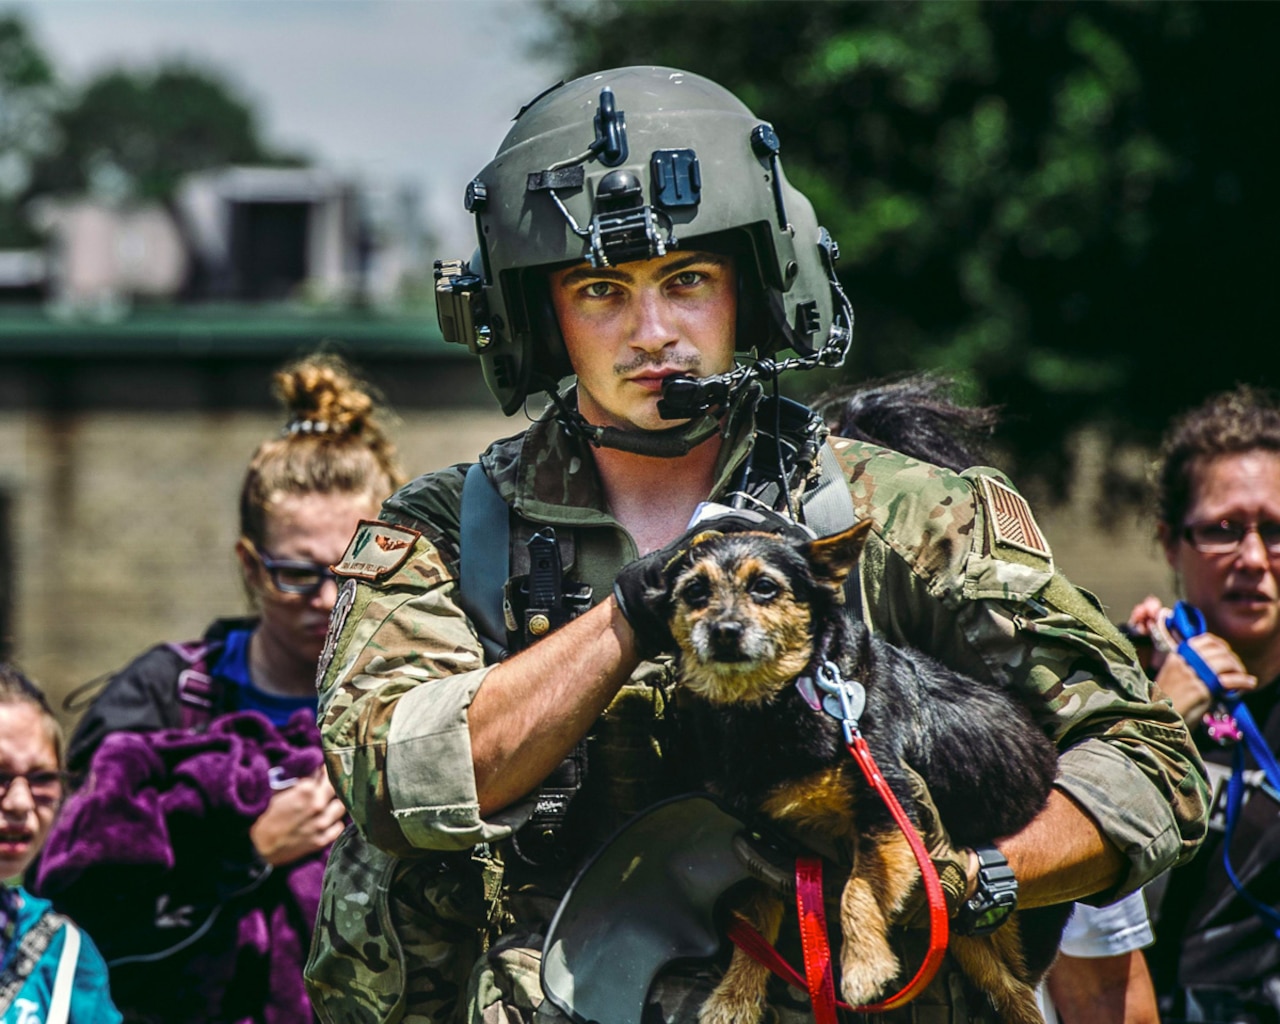 Air Force Airman carries a dog and leads a family to safety.